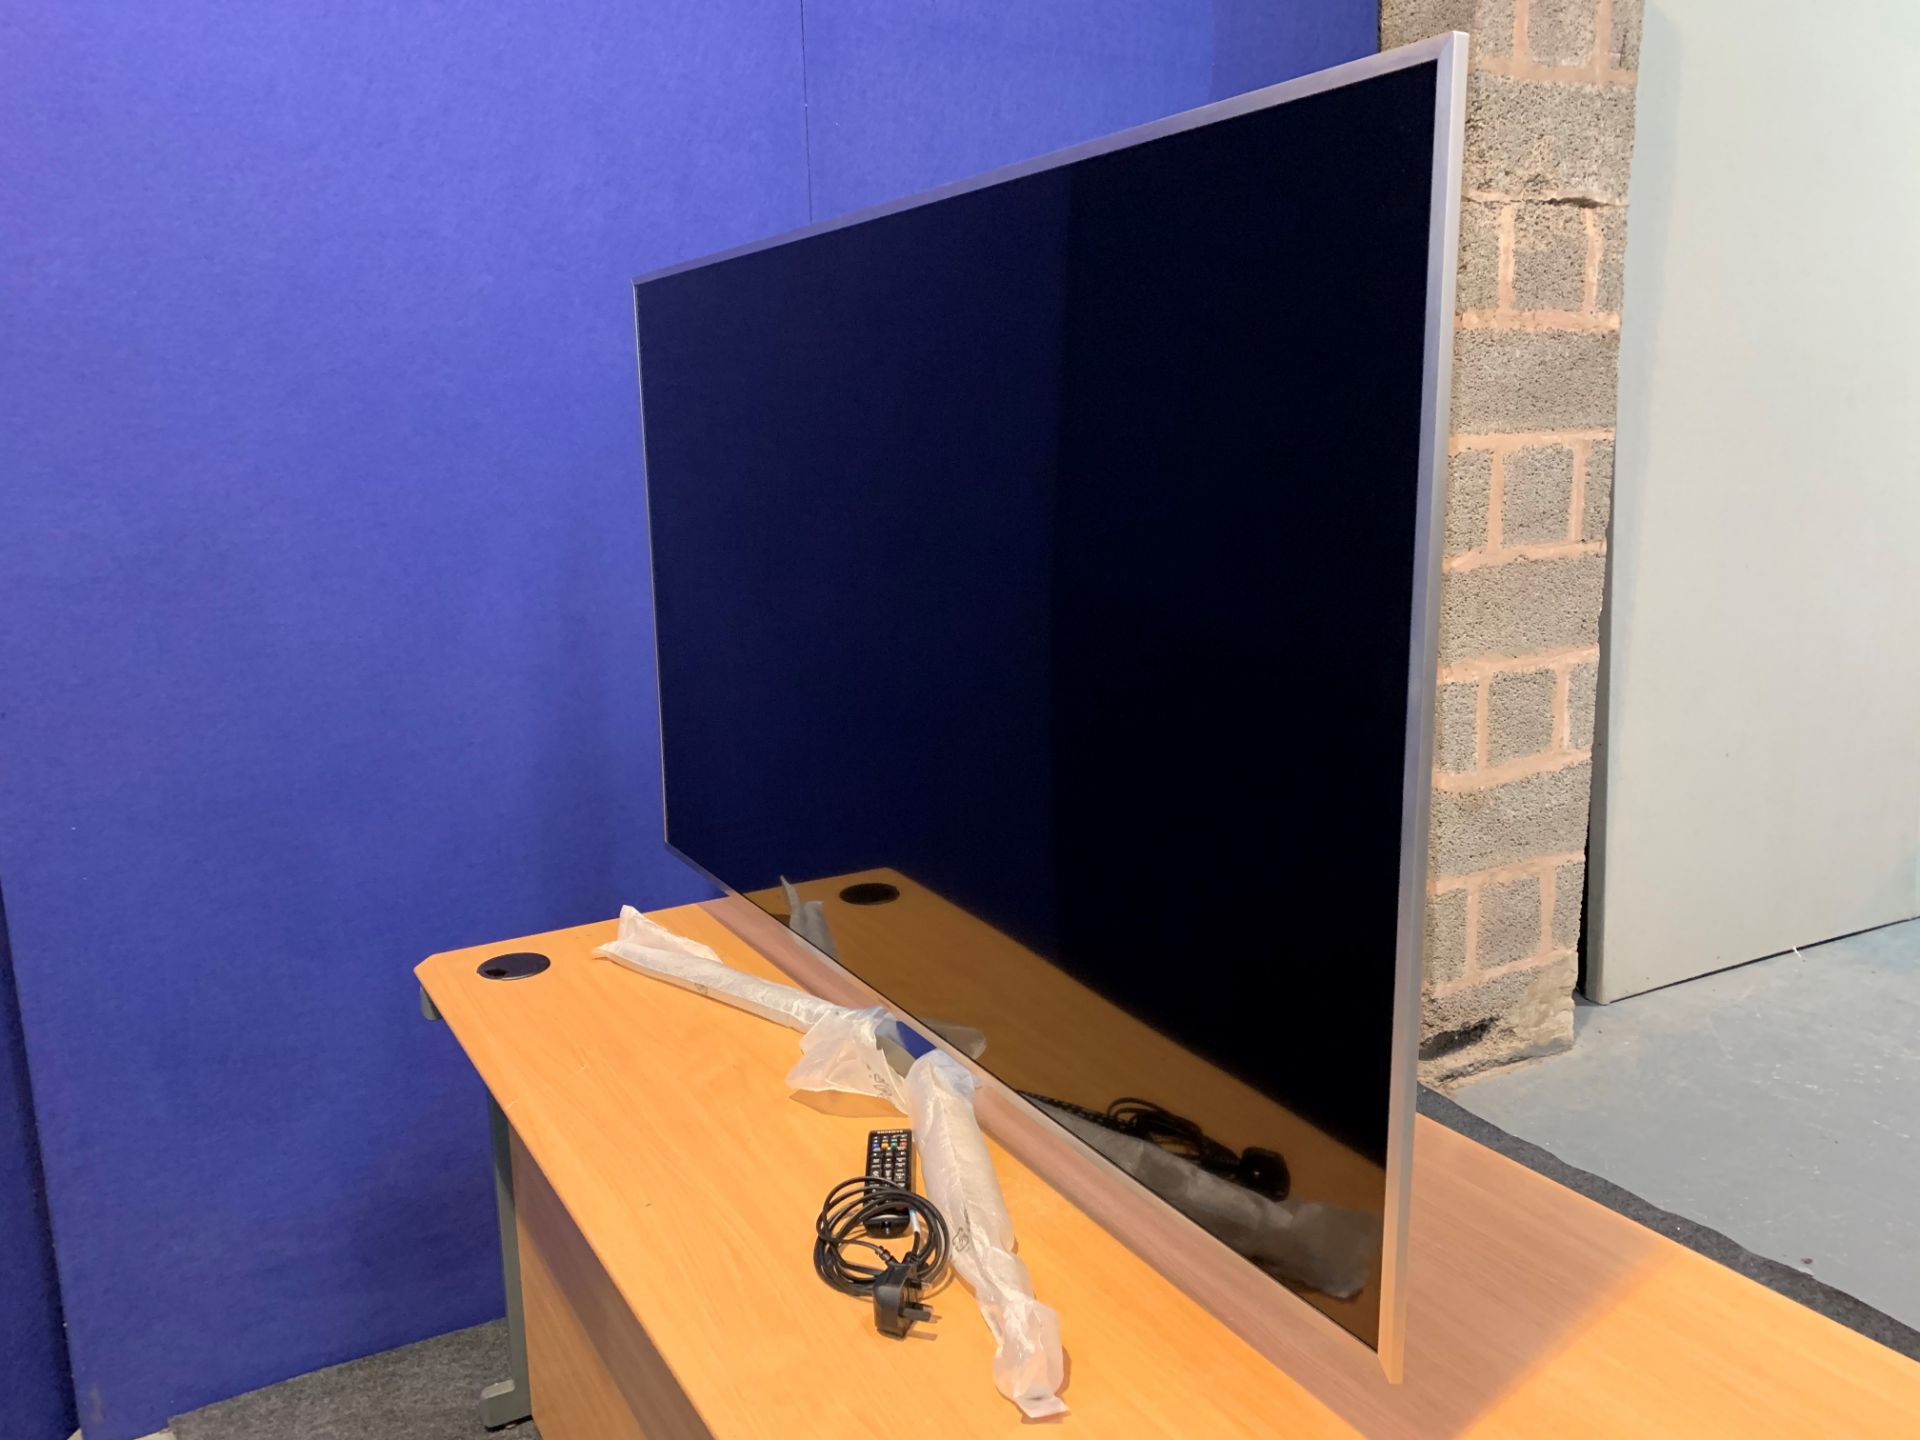 Samsung 65" 4K LED Screen with Desk Mount, IEC and Remote Control, 3 x HDMi, USB. For Flightcase see - Image 2 of 5